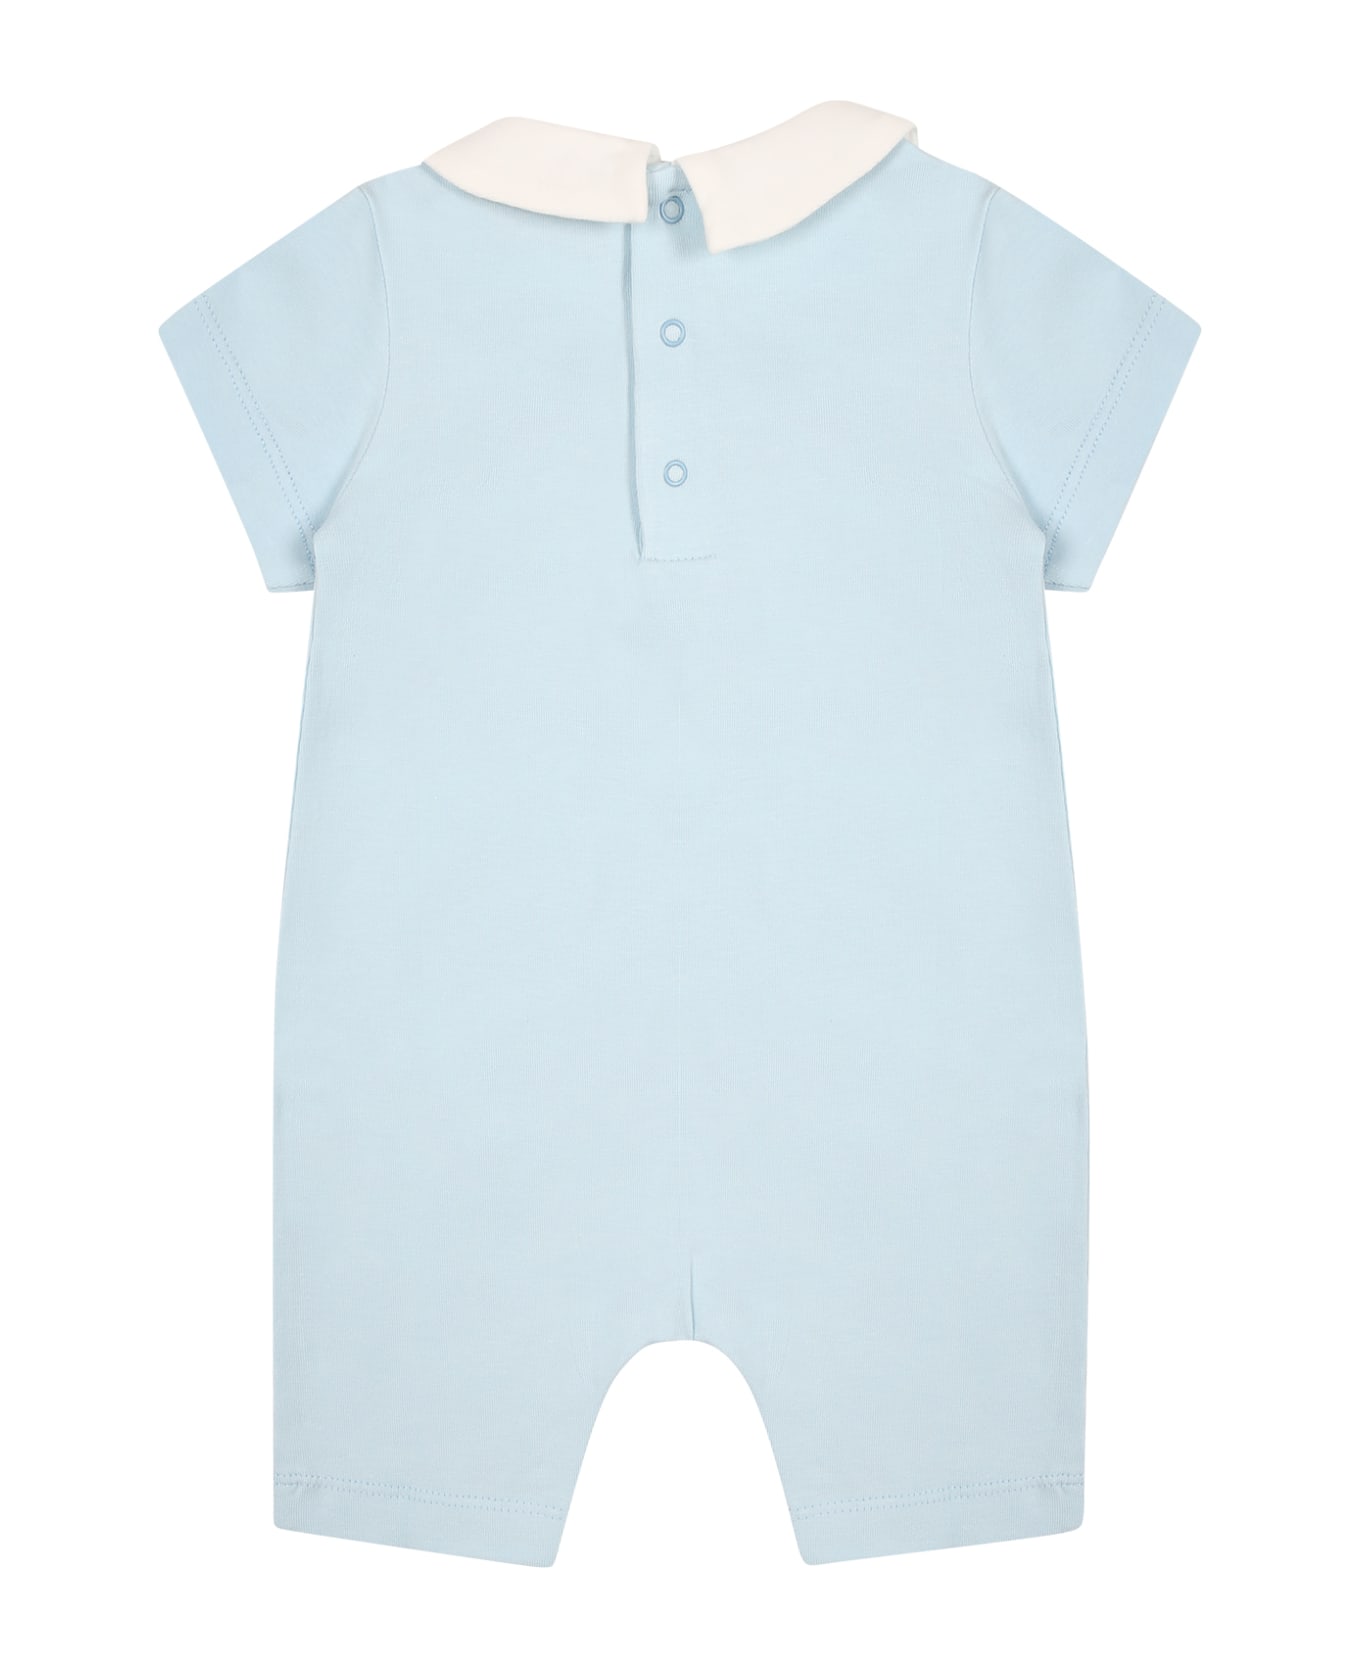 Moschino Light Blue Bodysuit For Baby Boy With Teddy Bear And Duck - Light Blue